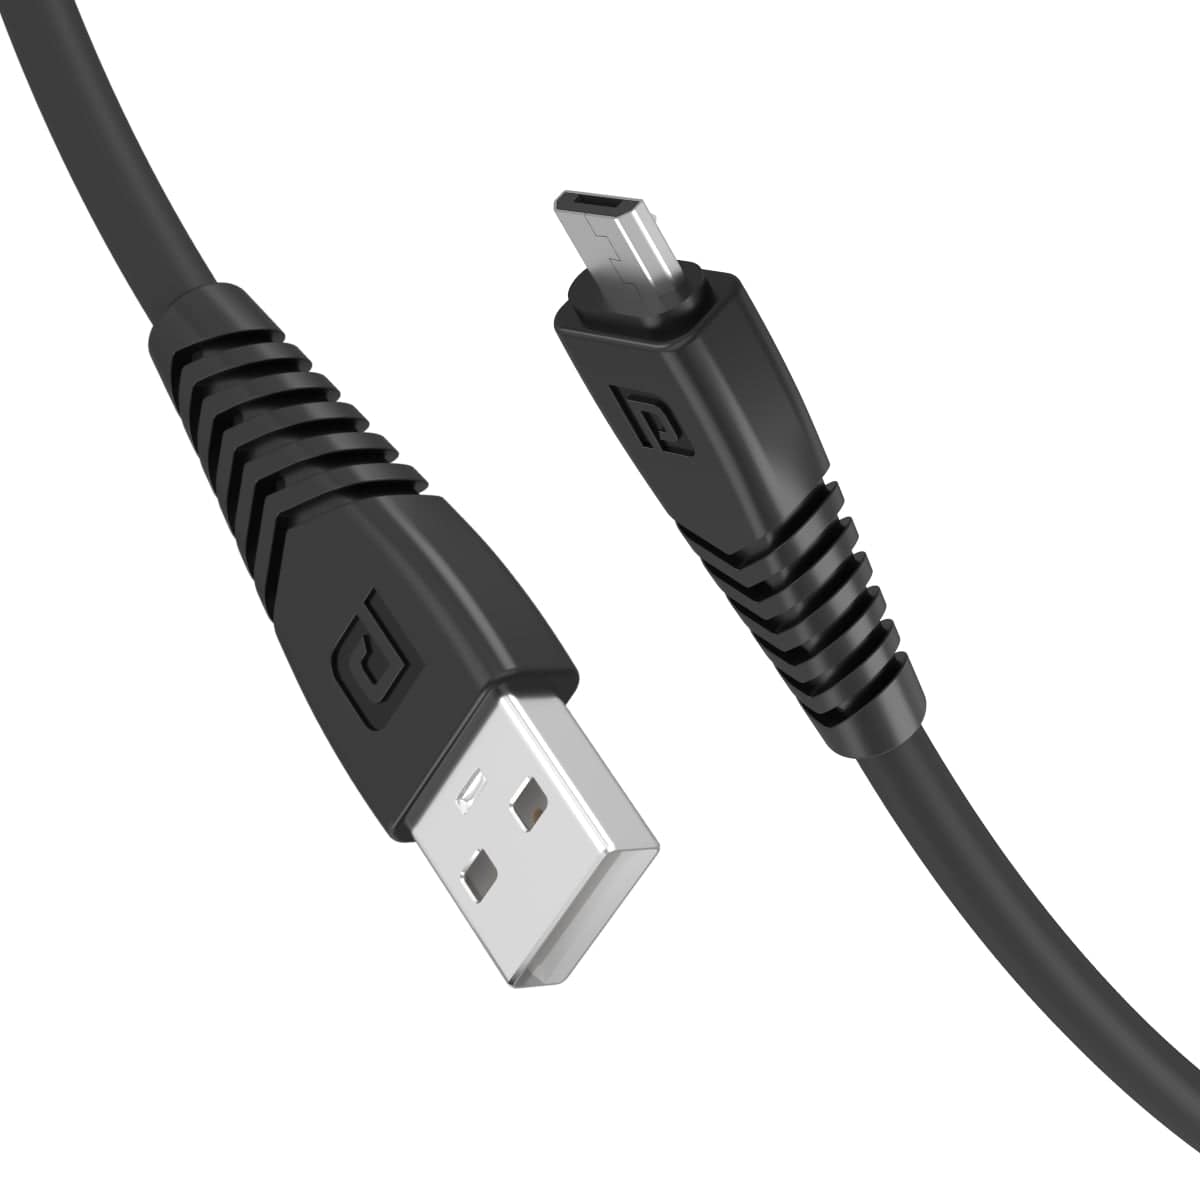 Micro USB Cable 